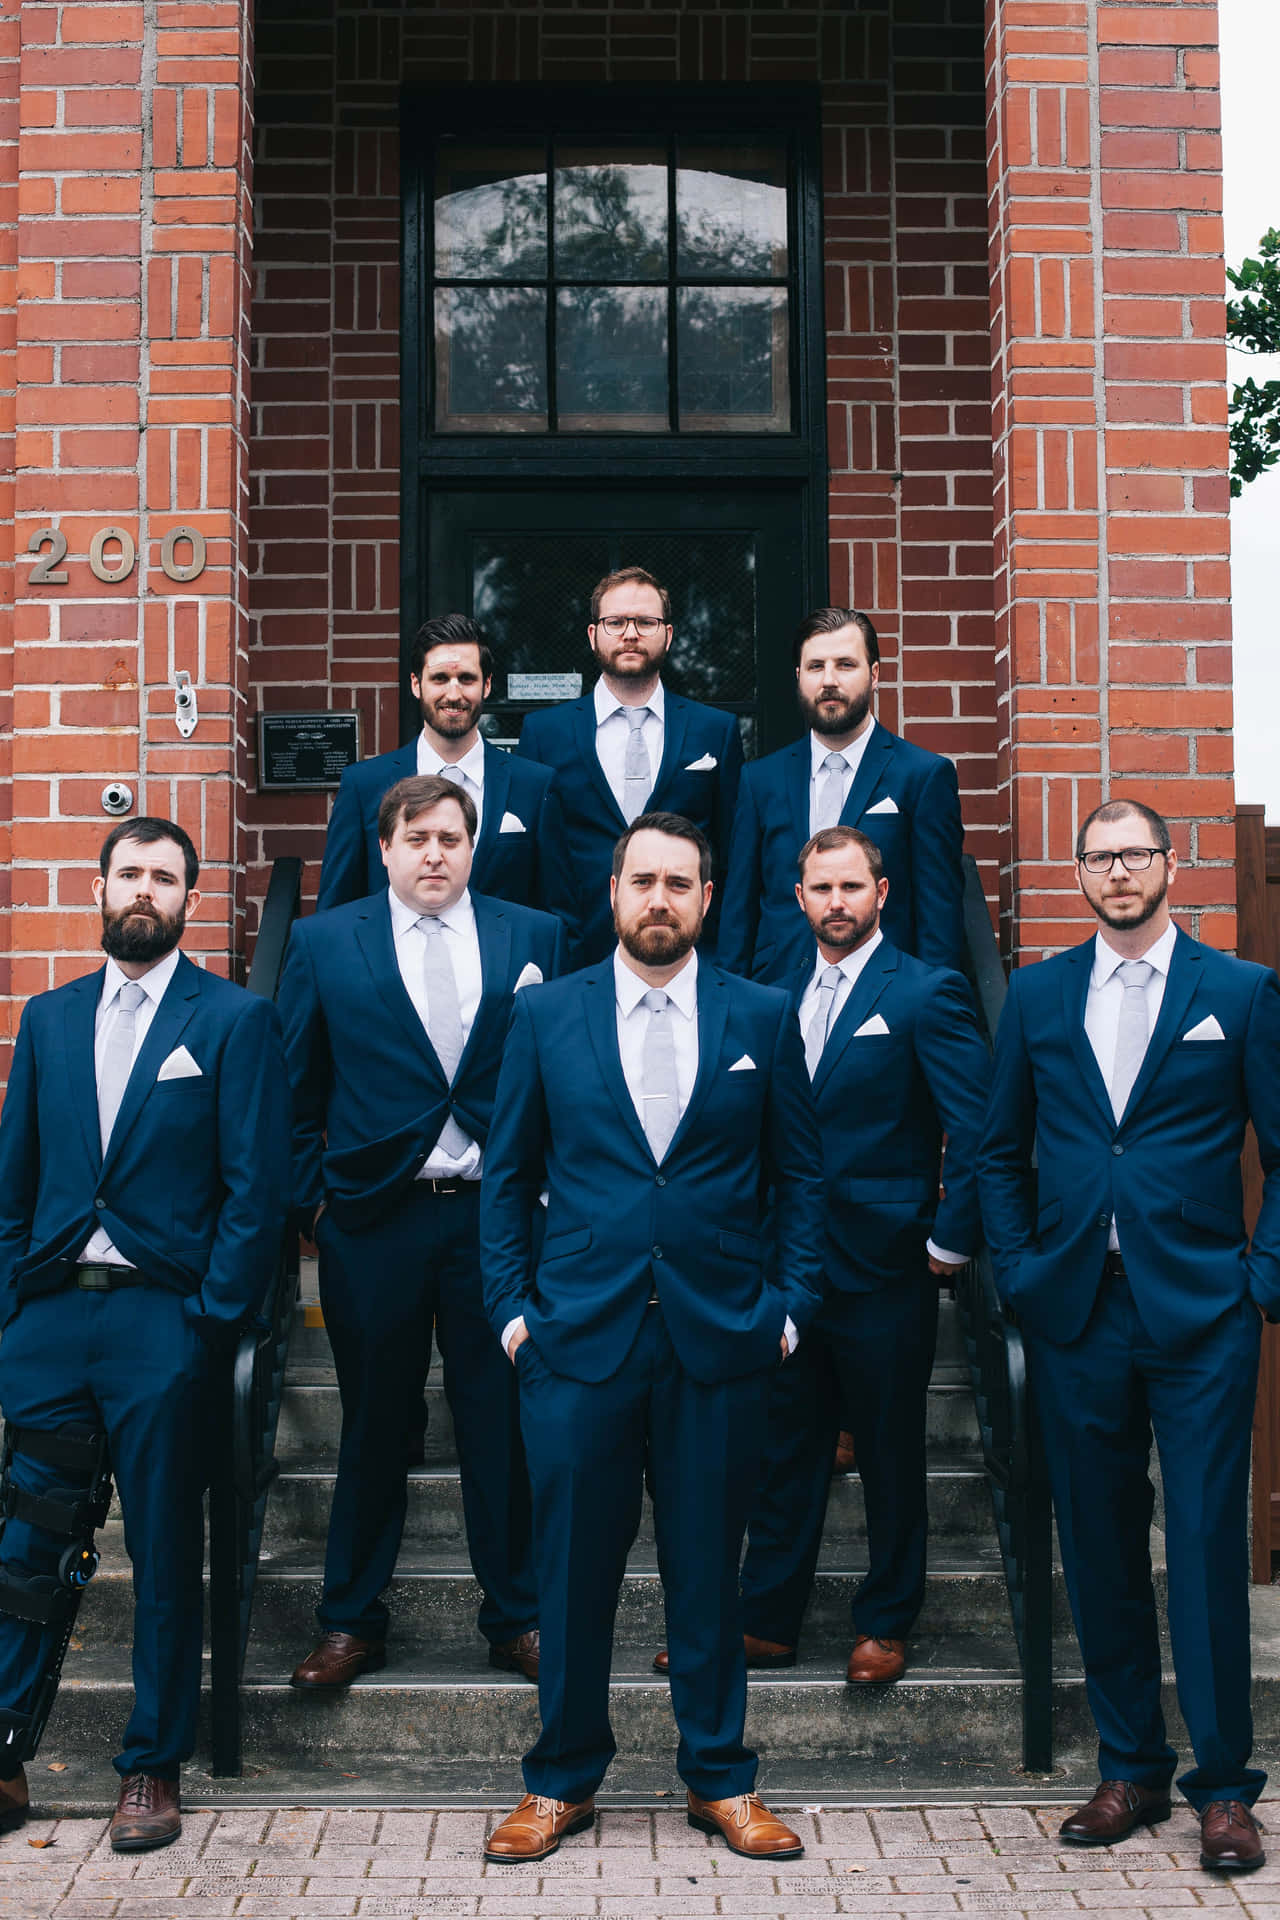 Happiness Starts Now - Groomsmen Taking a Picture Before the Special Day